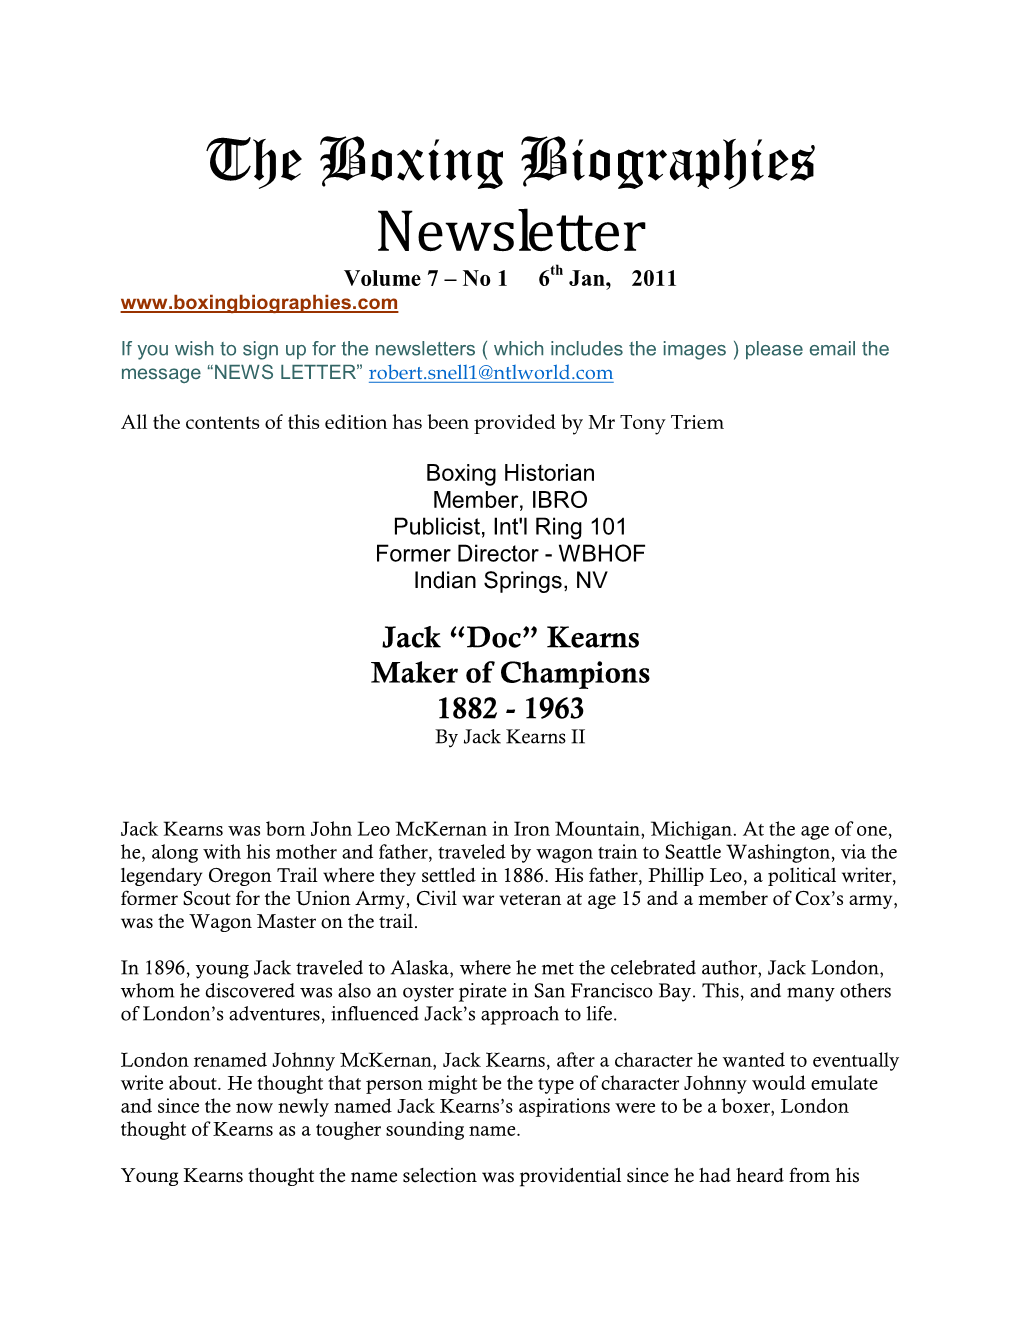 The Boxing Biographies Newsletter Volume 7 – No 1 6Th Jan, 2011